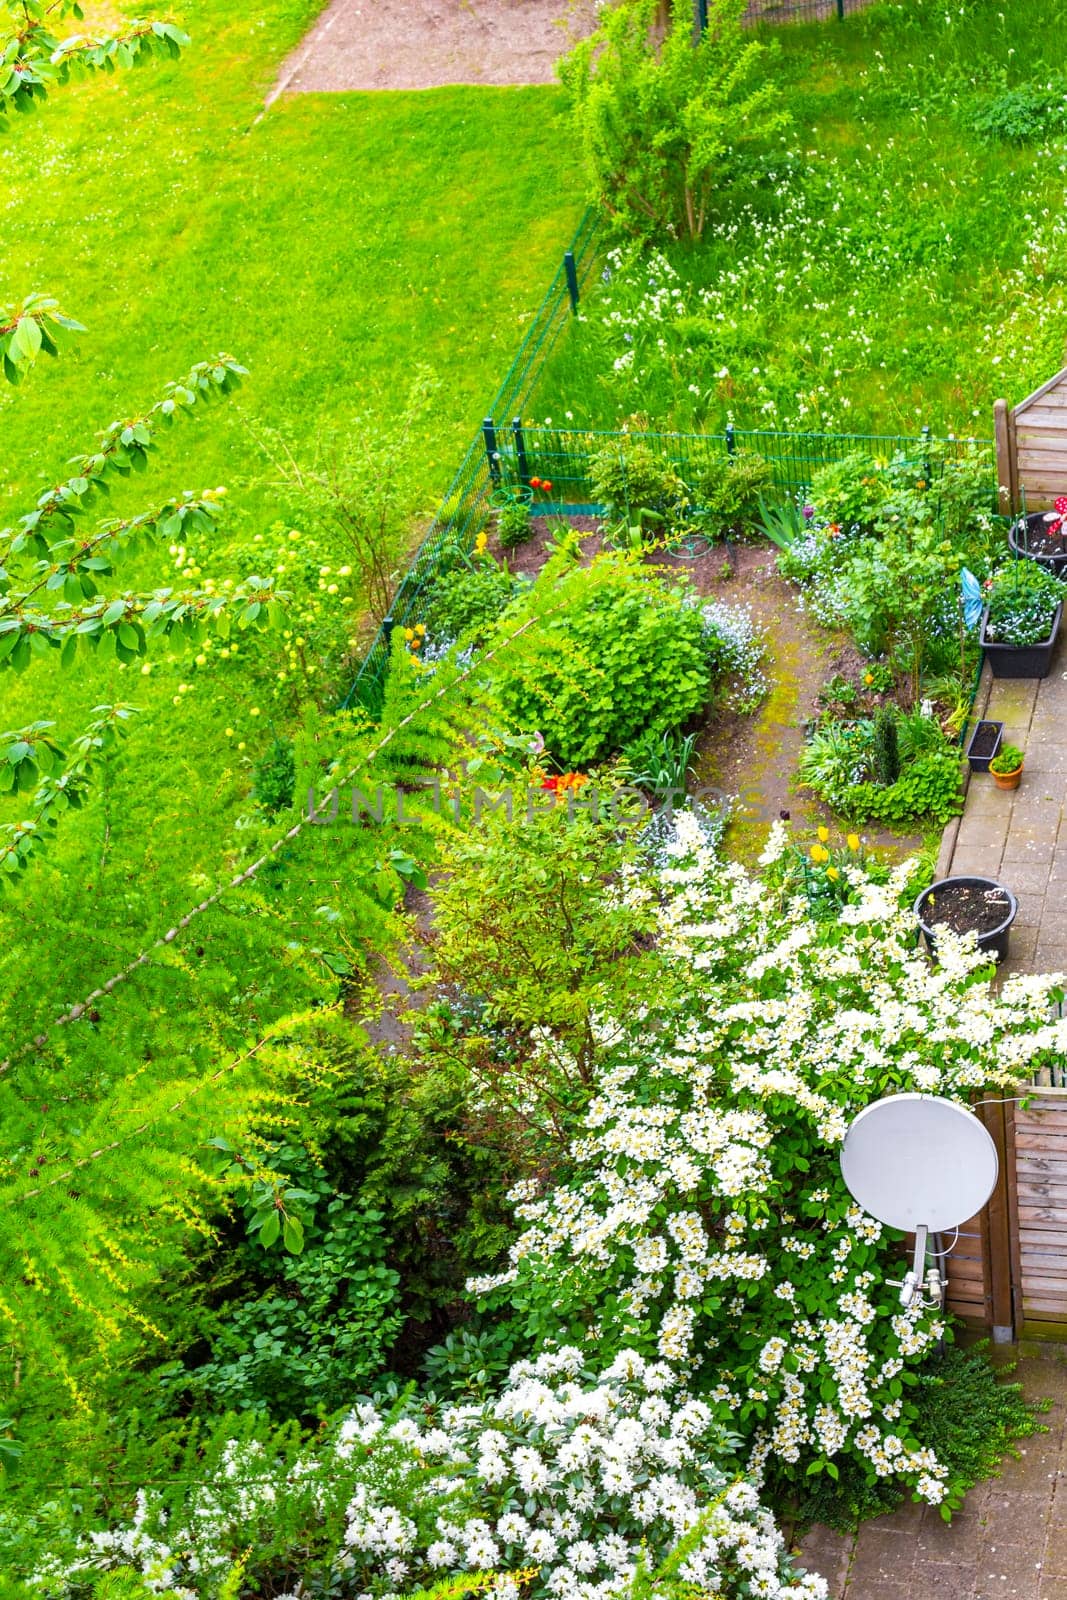 Garden with trees plants hut compost beds lawn in Germany. by Arkadij